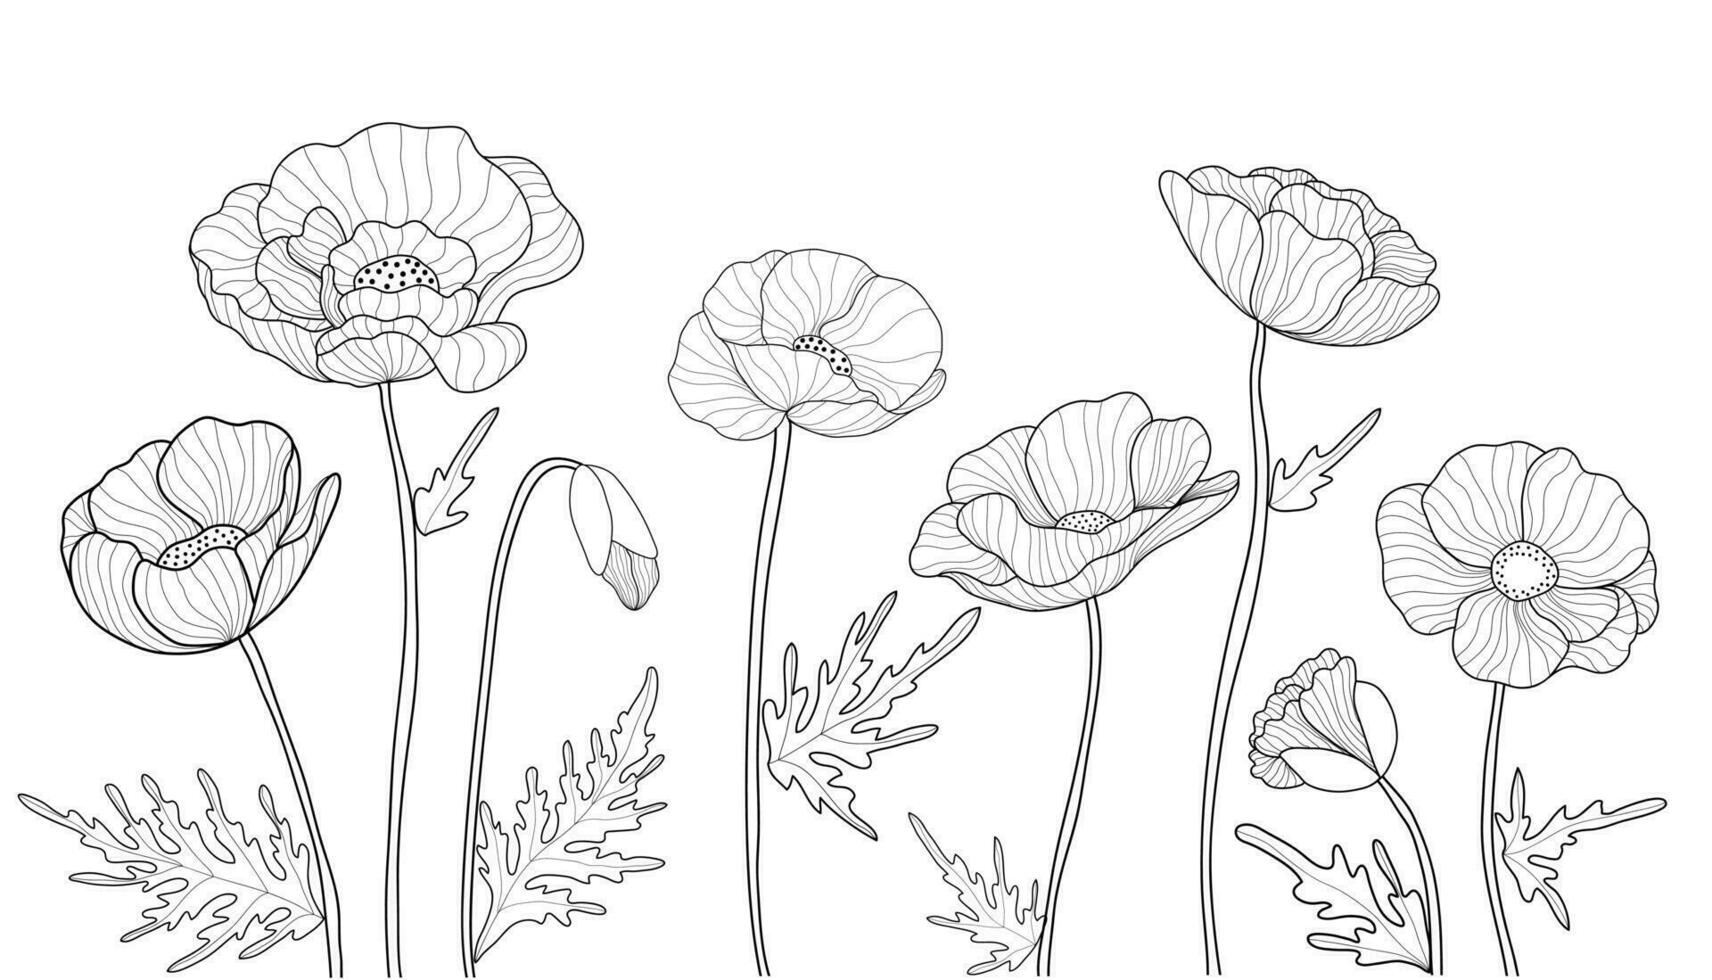 Hand drawn poppy flowers on white background. Doodle drawing. Floral outline design vector